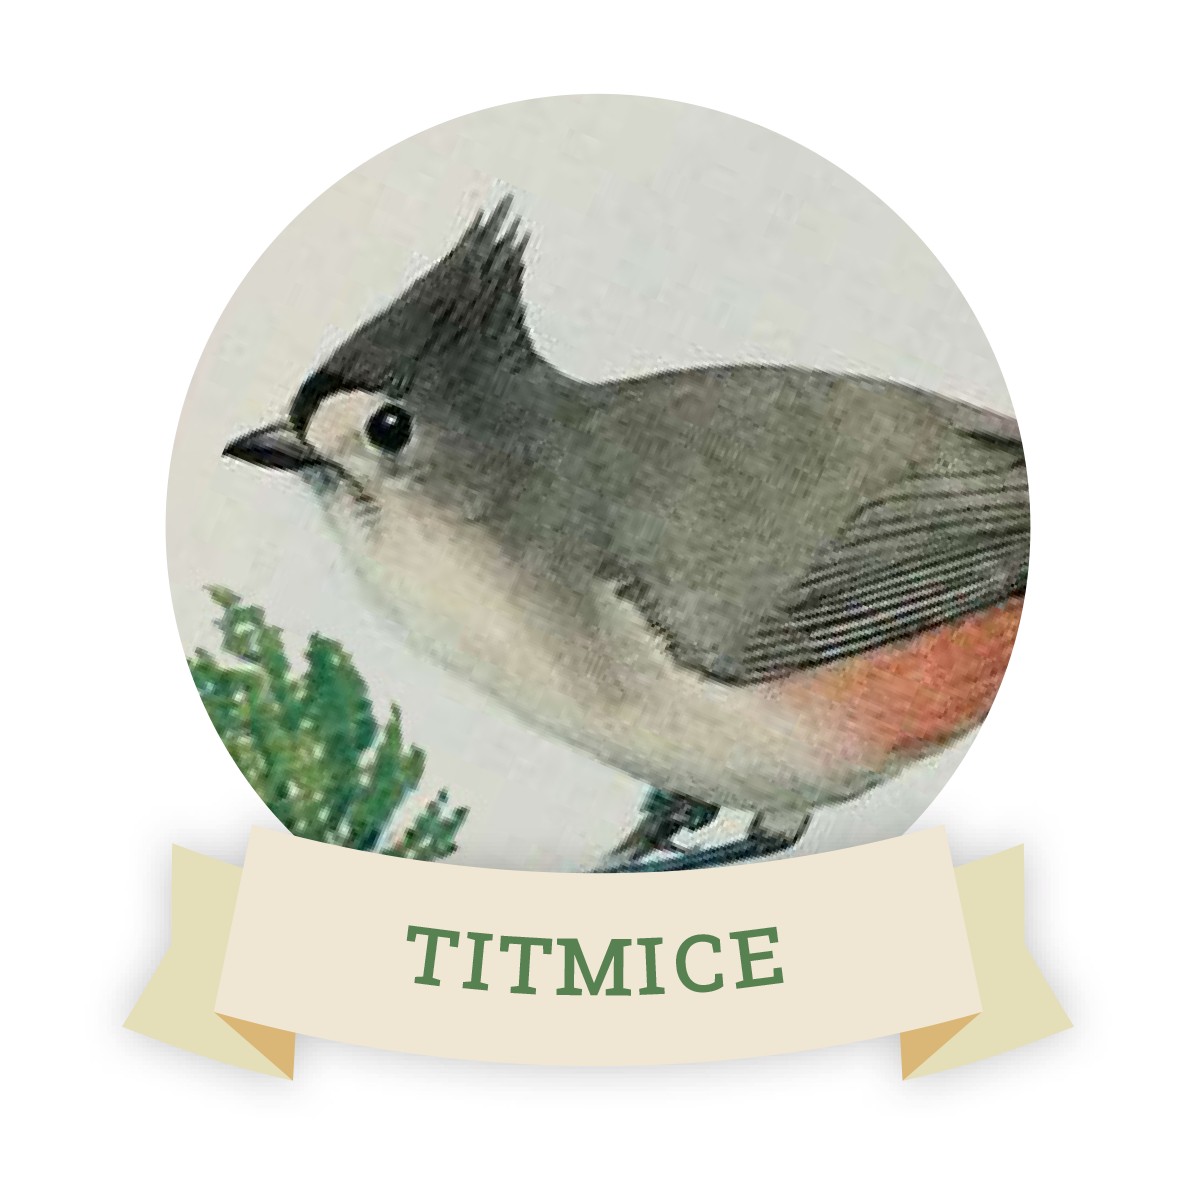 Image of a titmouse. Links to titmouse favorite food and feeders.